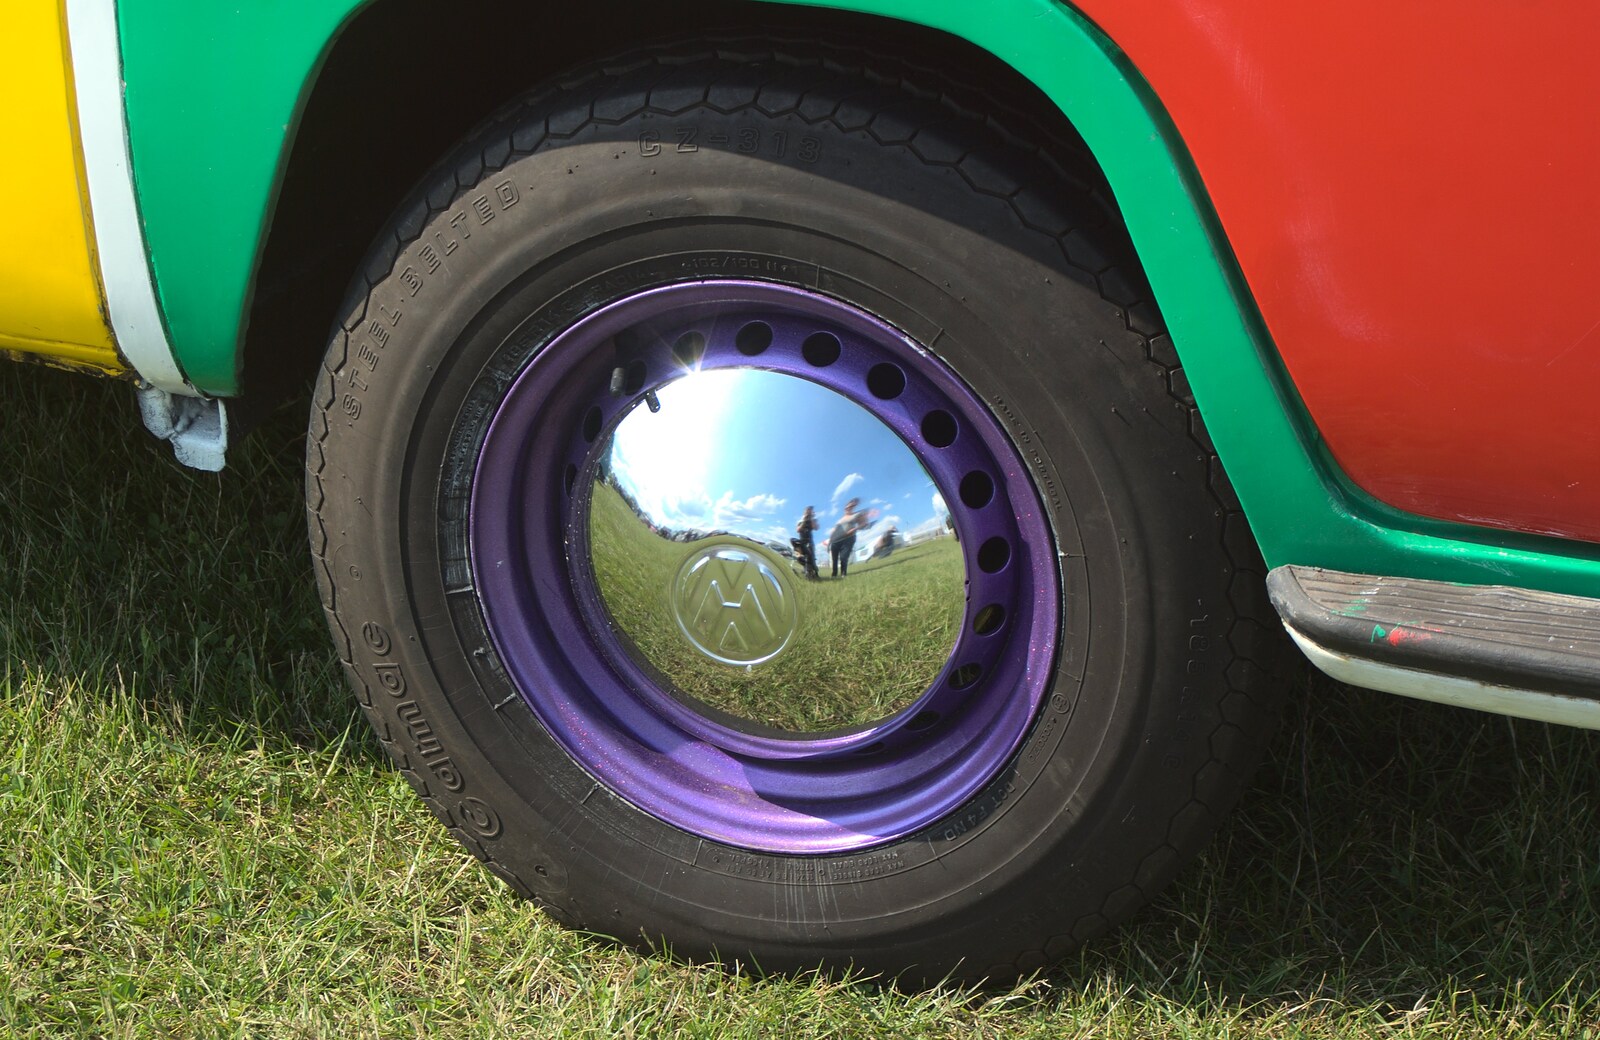 Shiny purple wheel-trim from TouchType at Cubana, BSCC at Gislingham, and Tas Pide, London and Suffolk - 12th June 2011